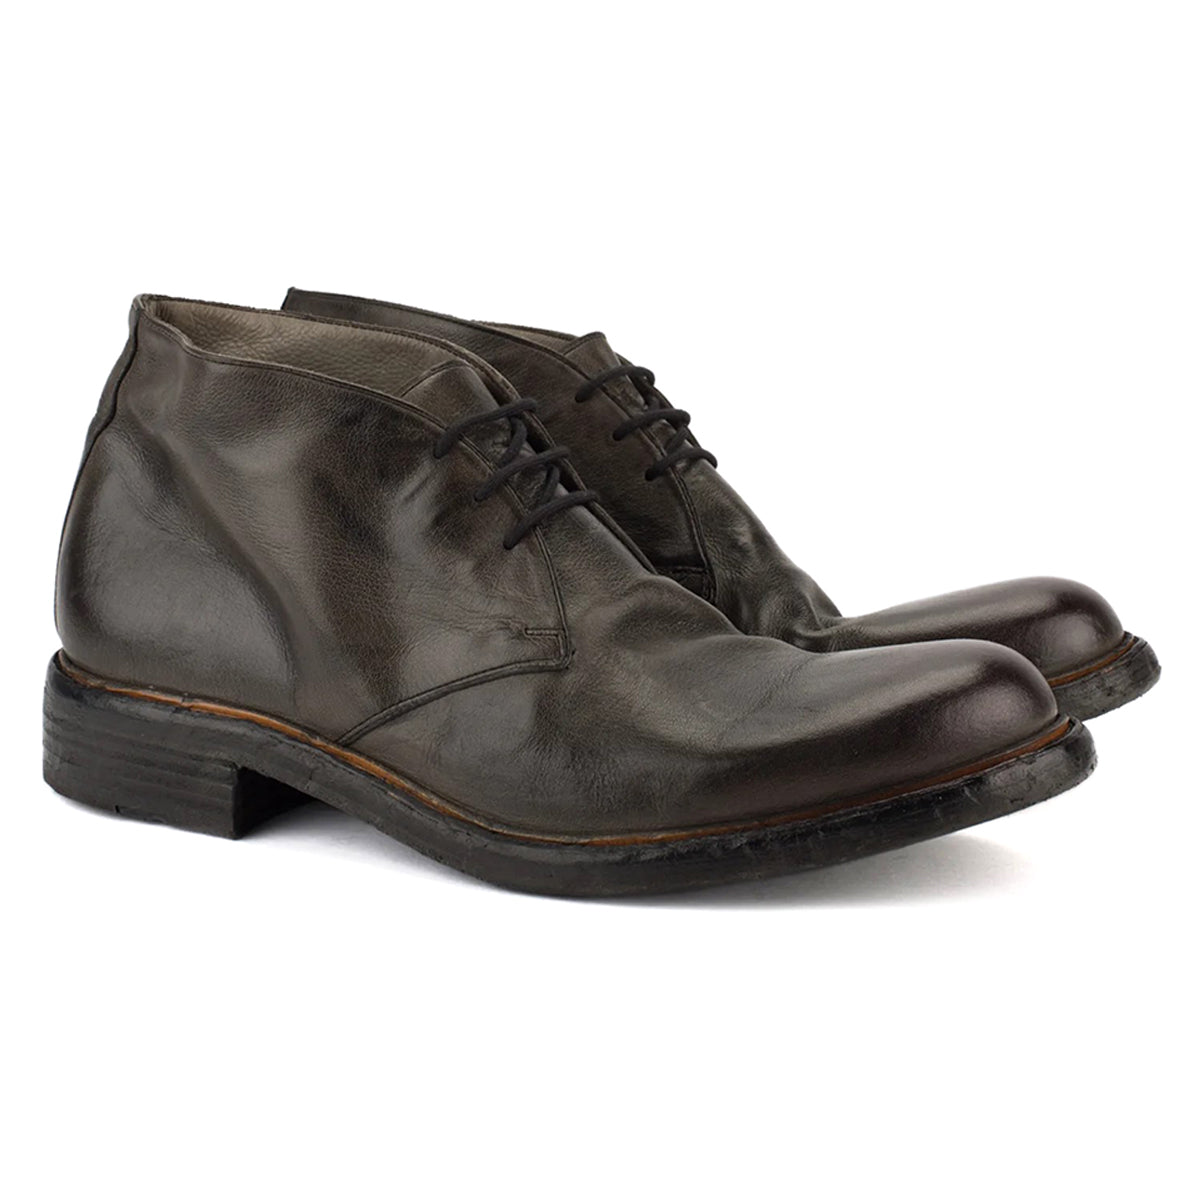 Ettore 1187 brown washed